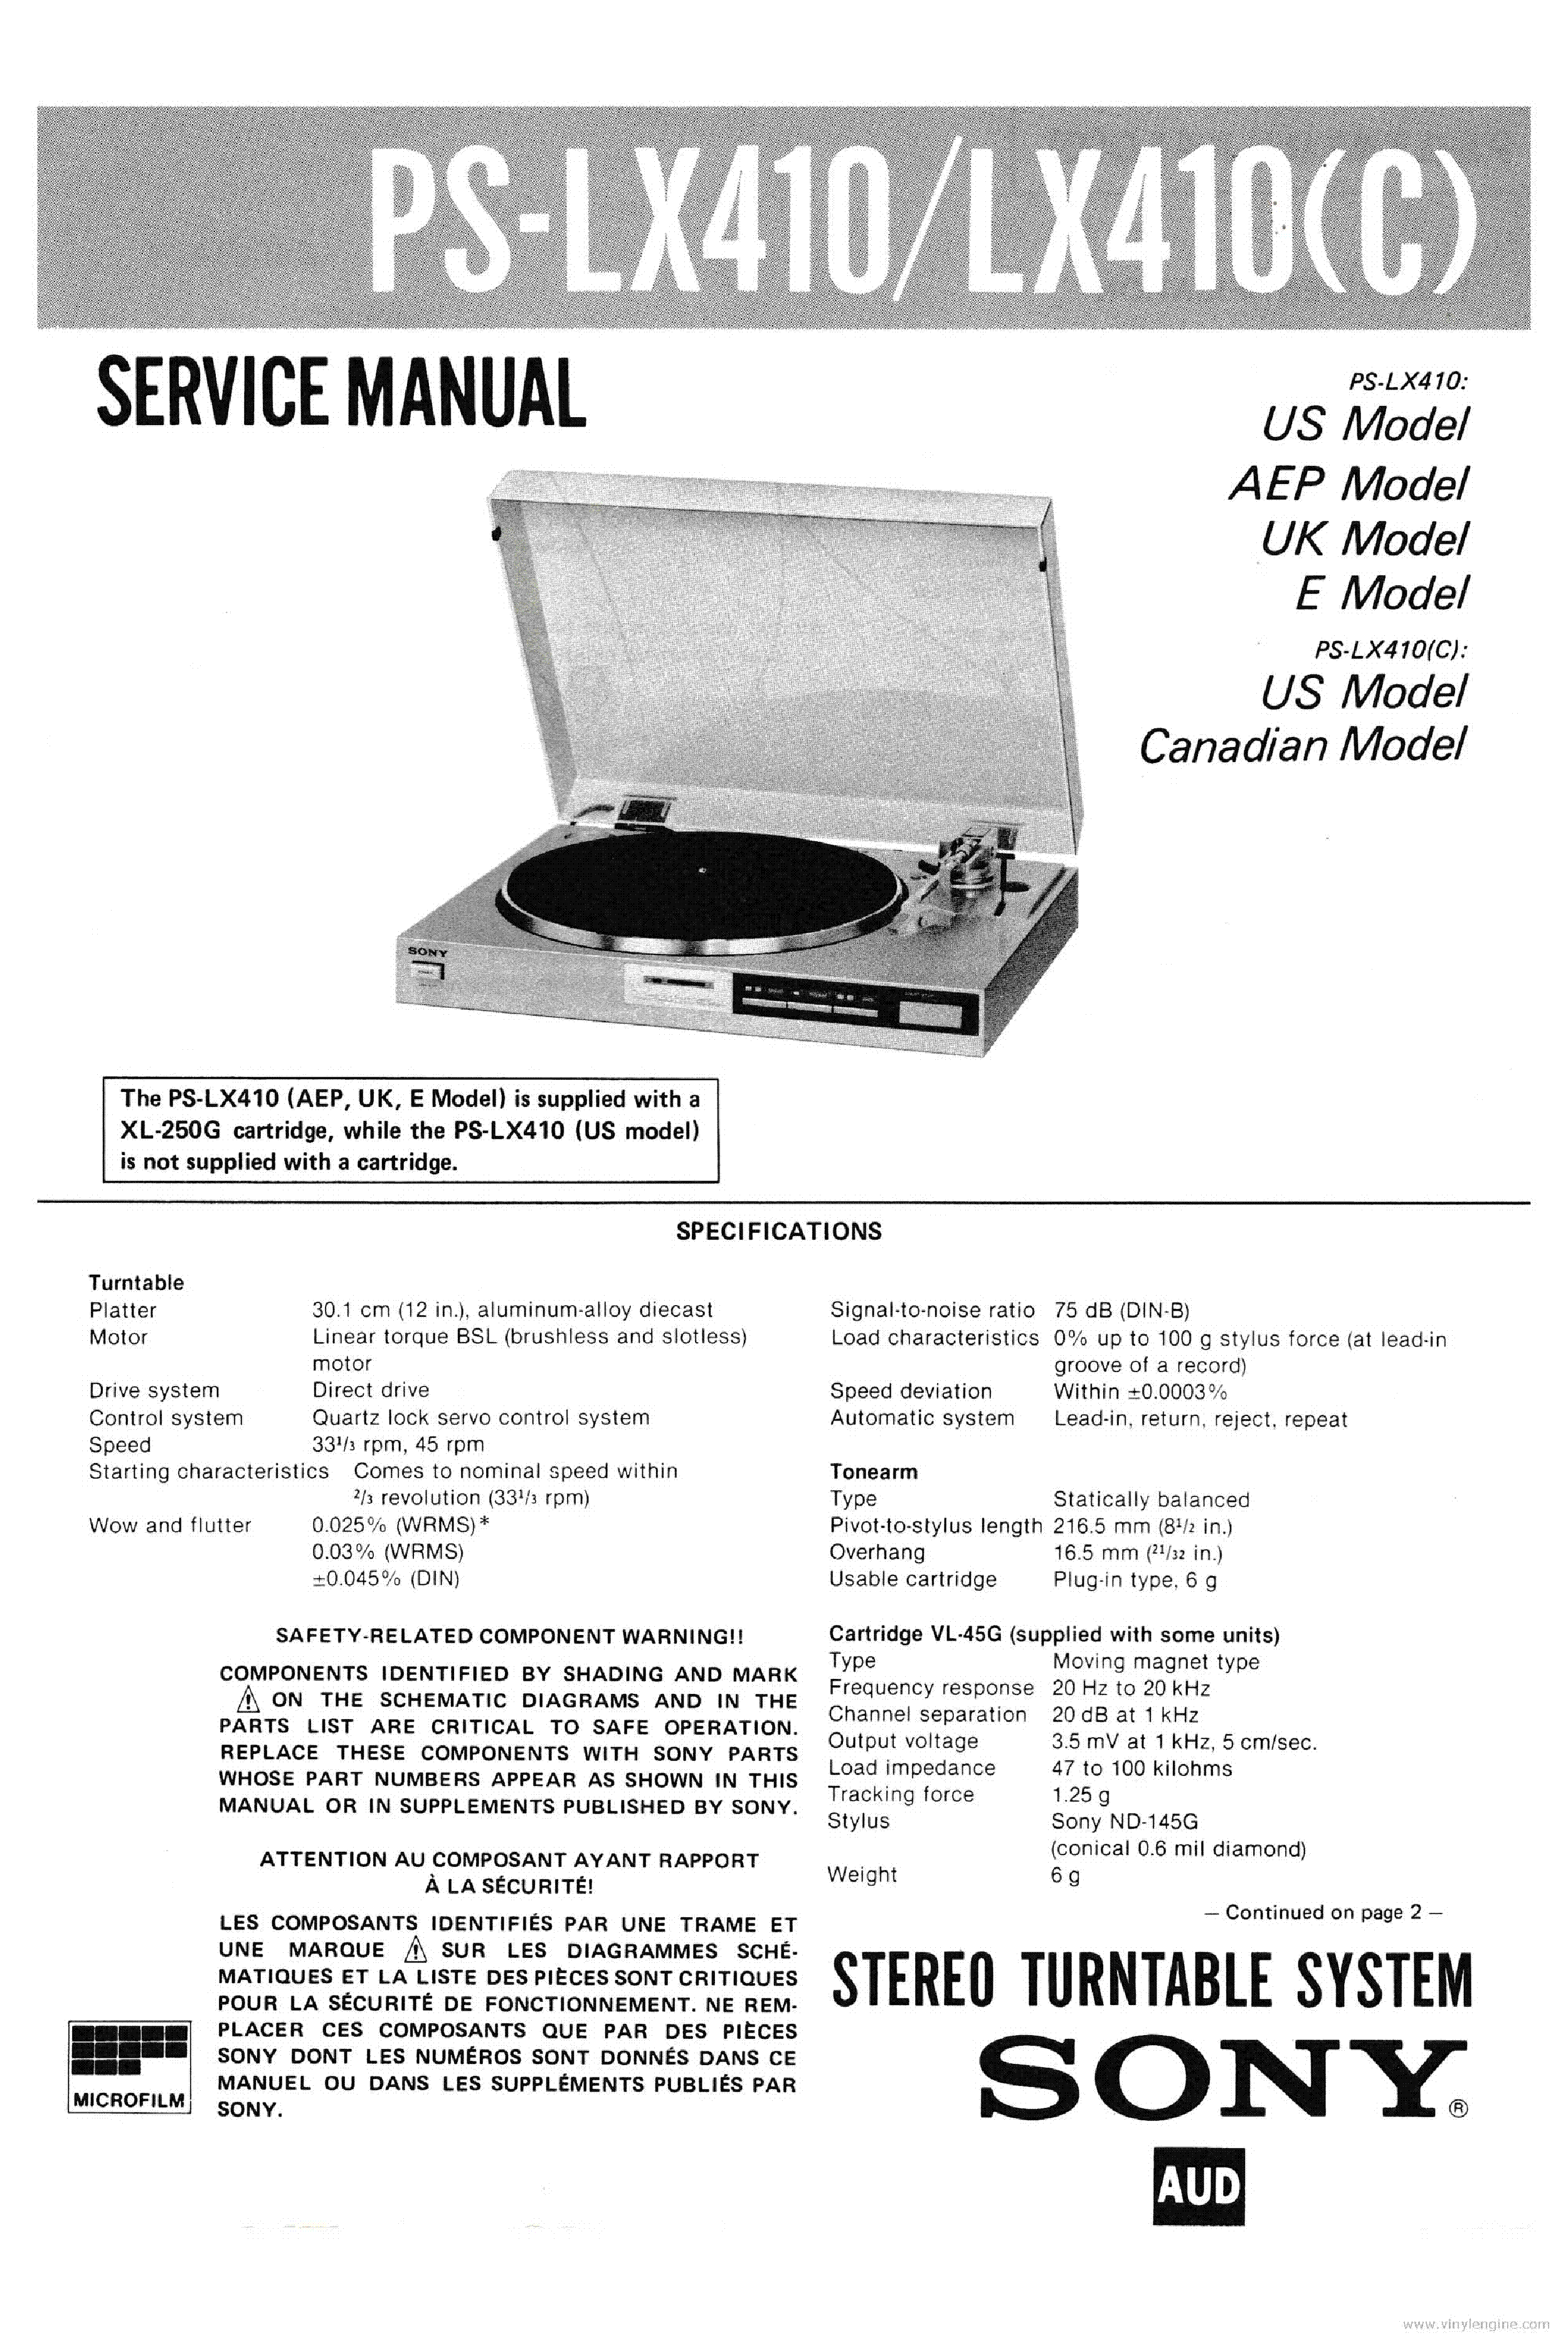 SONY PS-LX410 PS-LX410C TURNTABLE service manual (1st page)